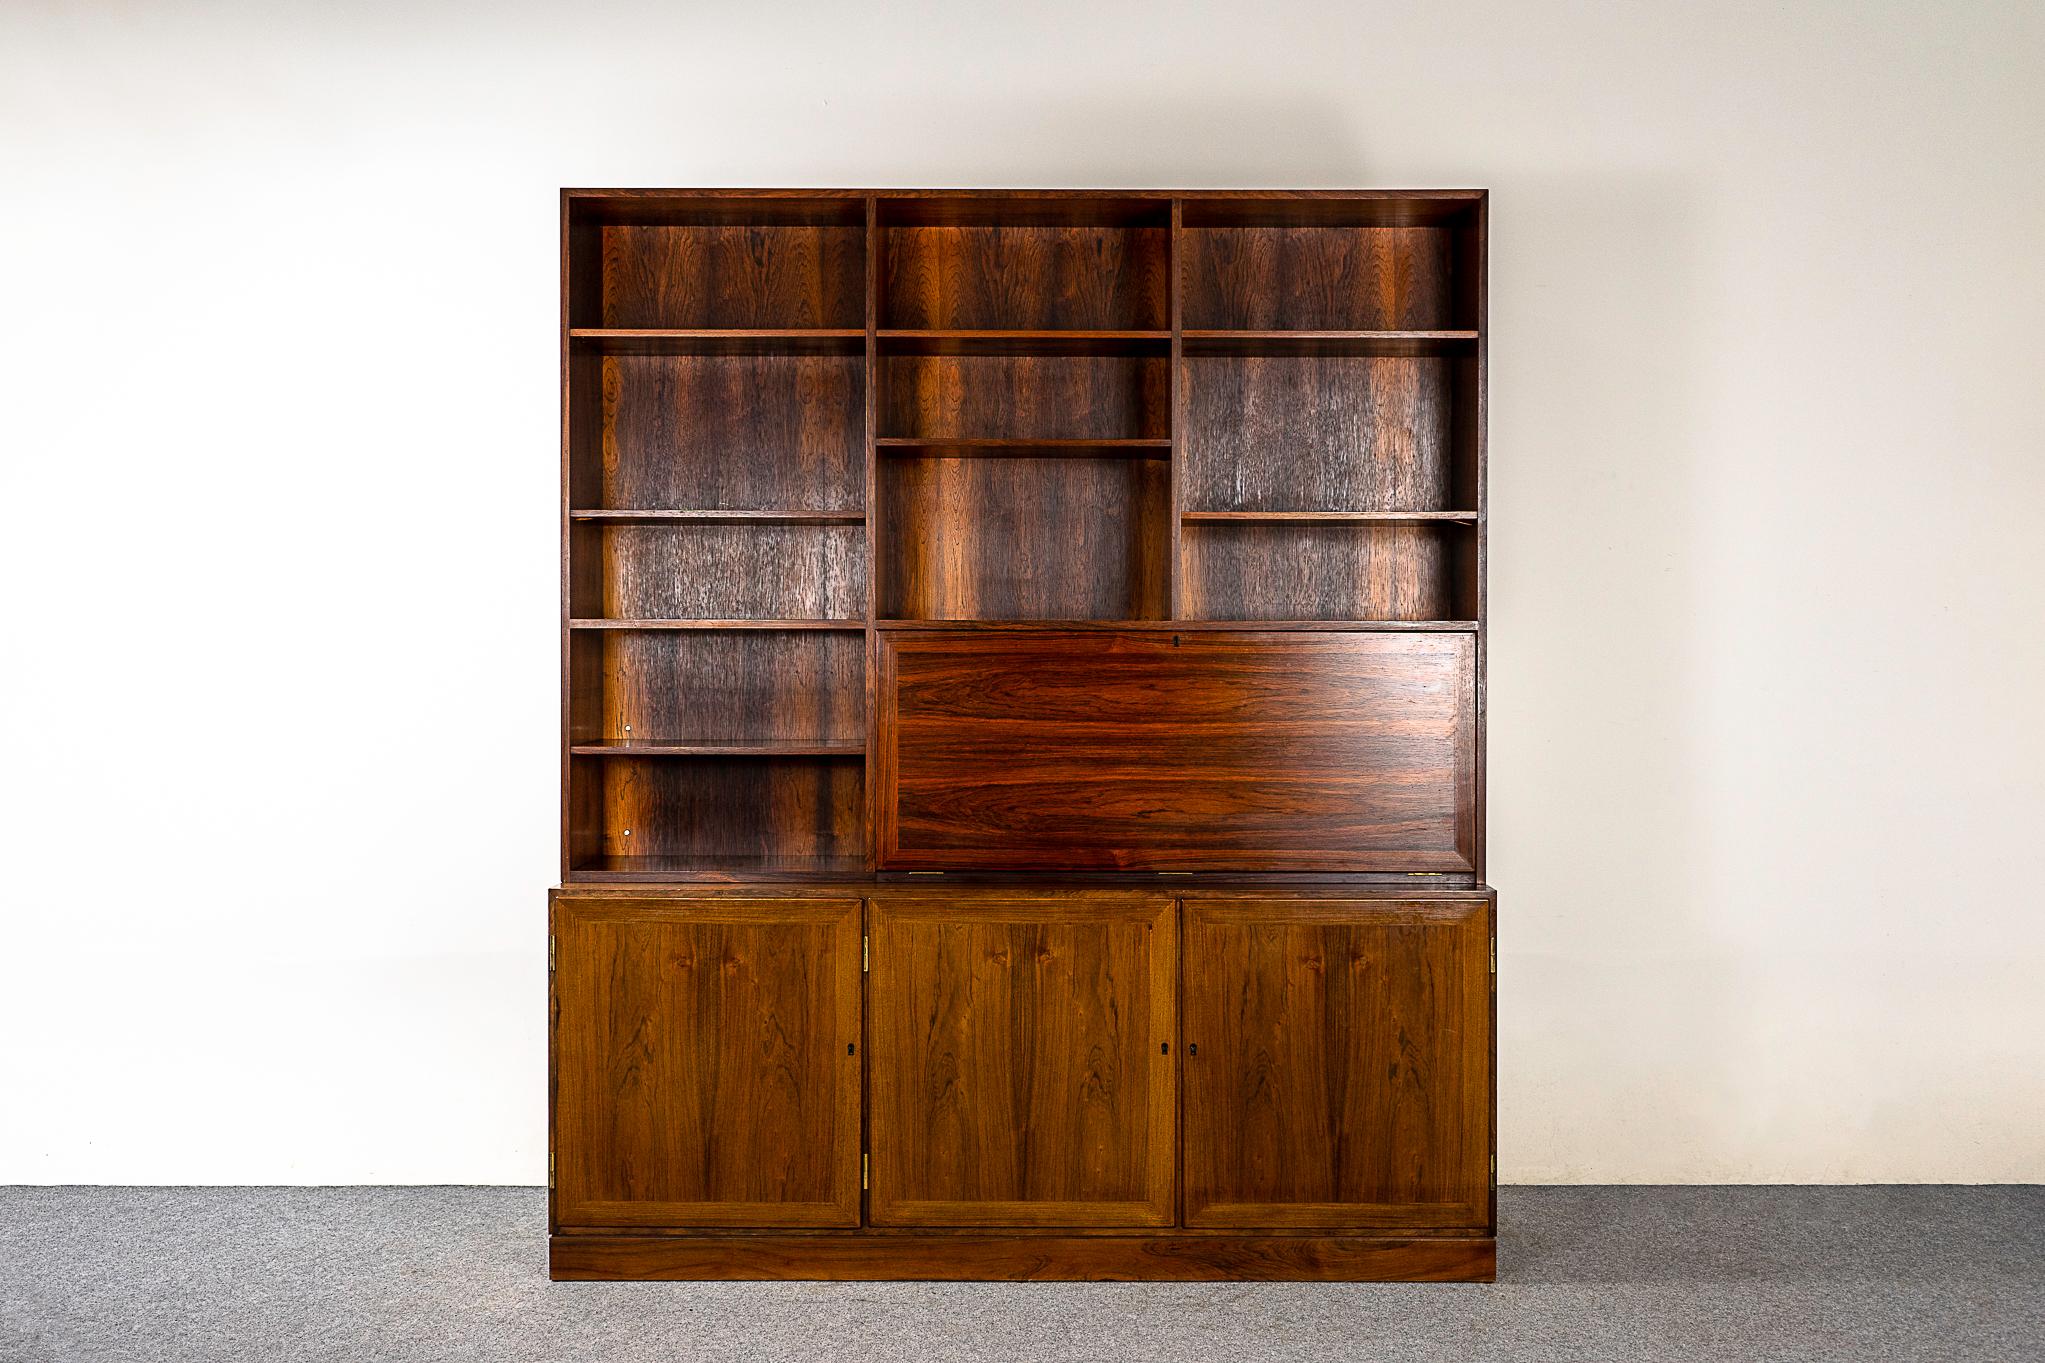 Rosewood Danish bookcase cabinet by Kai Winding, circa 1960's. Highly functional design combines open shelving, lower cabinetry and a drop down desk with fitted interior.

Please inquire for international and remote shipping rates.